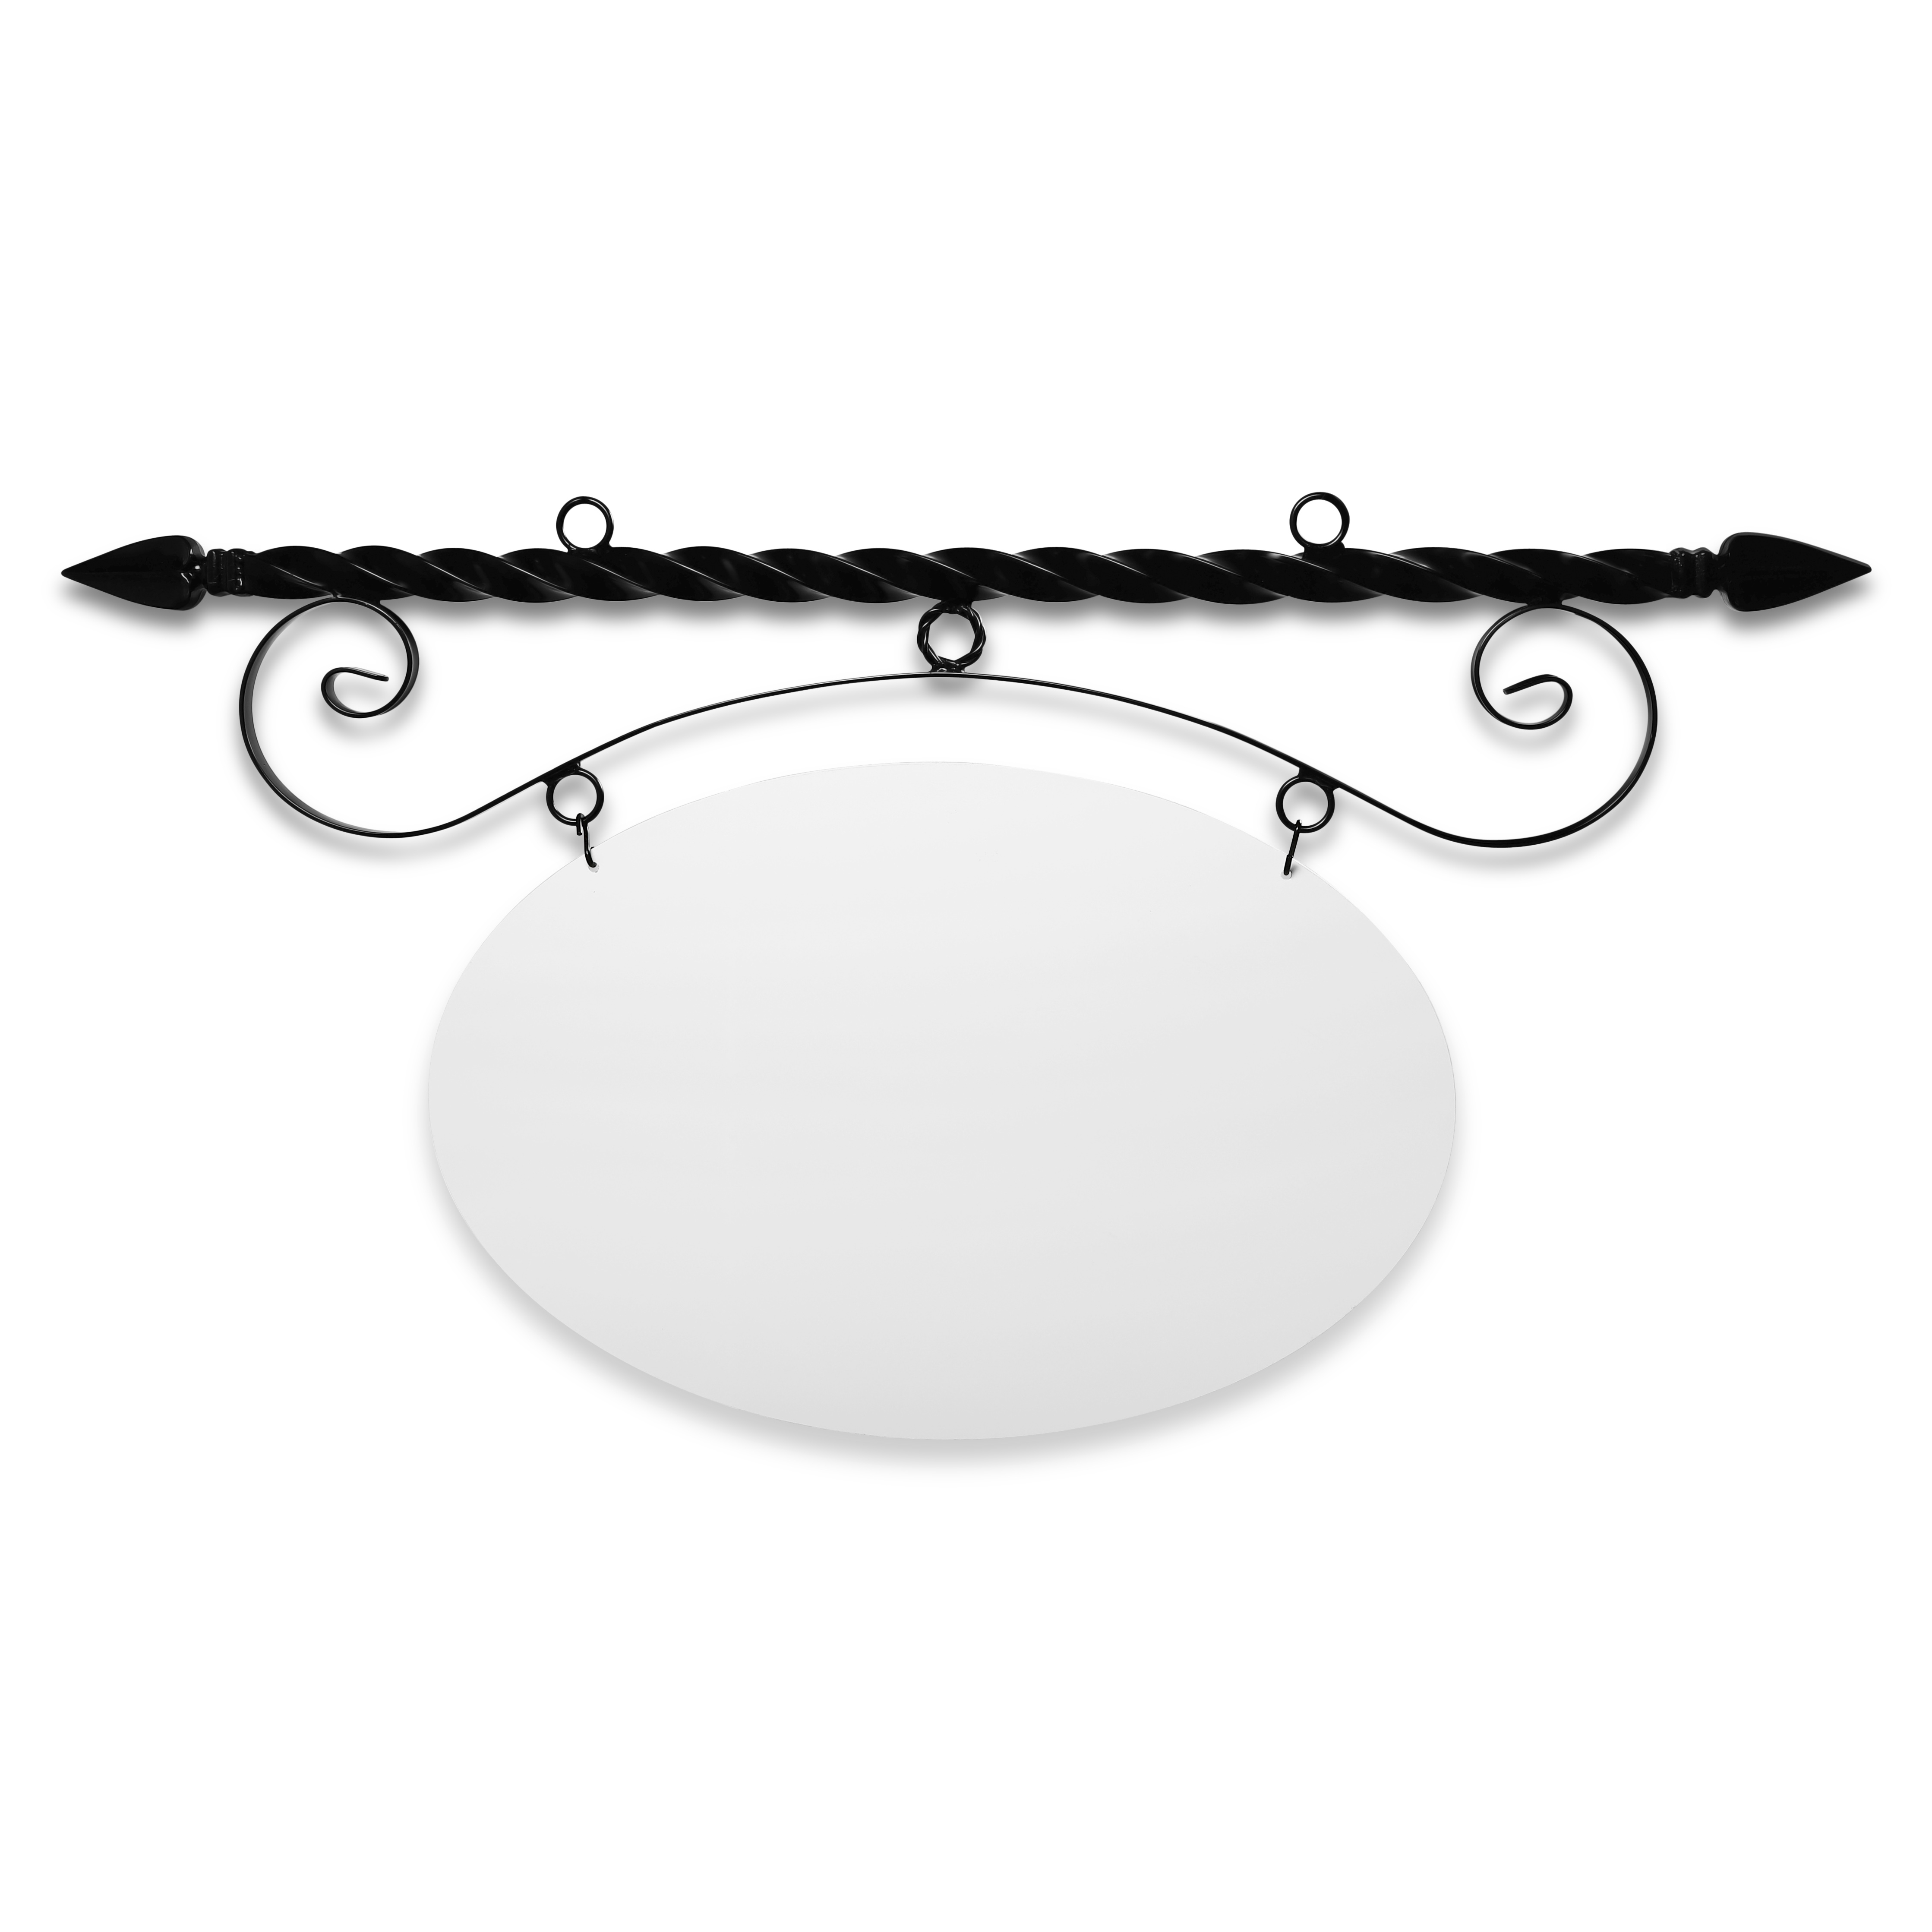 43'' Wide Ceiling Mount Bracket in  Black Powder Coated Steel with 22'' Tall X 33'' Wide X .080'' Thick White Aluminum Sign Blank and 2 Black Powder Coated S-Hooks (Spear Point Finial)